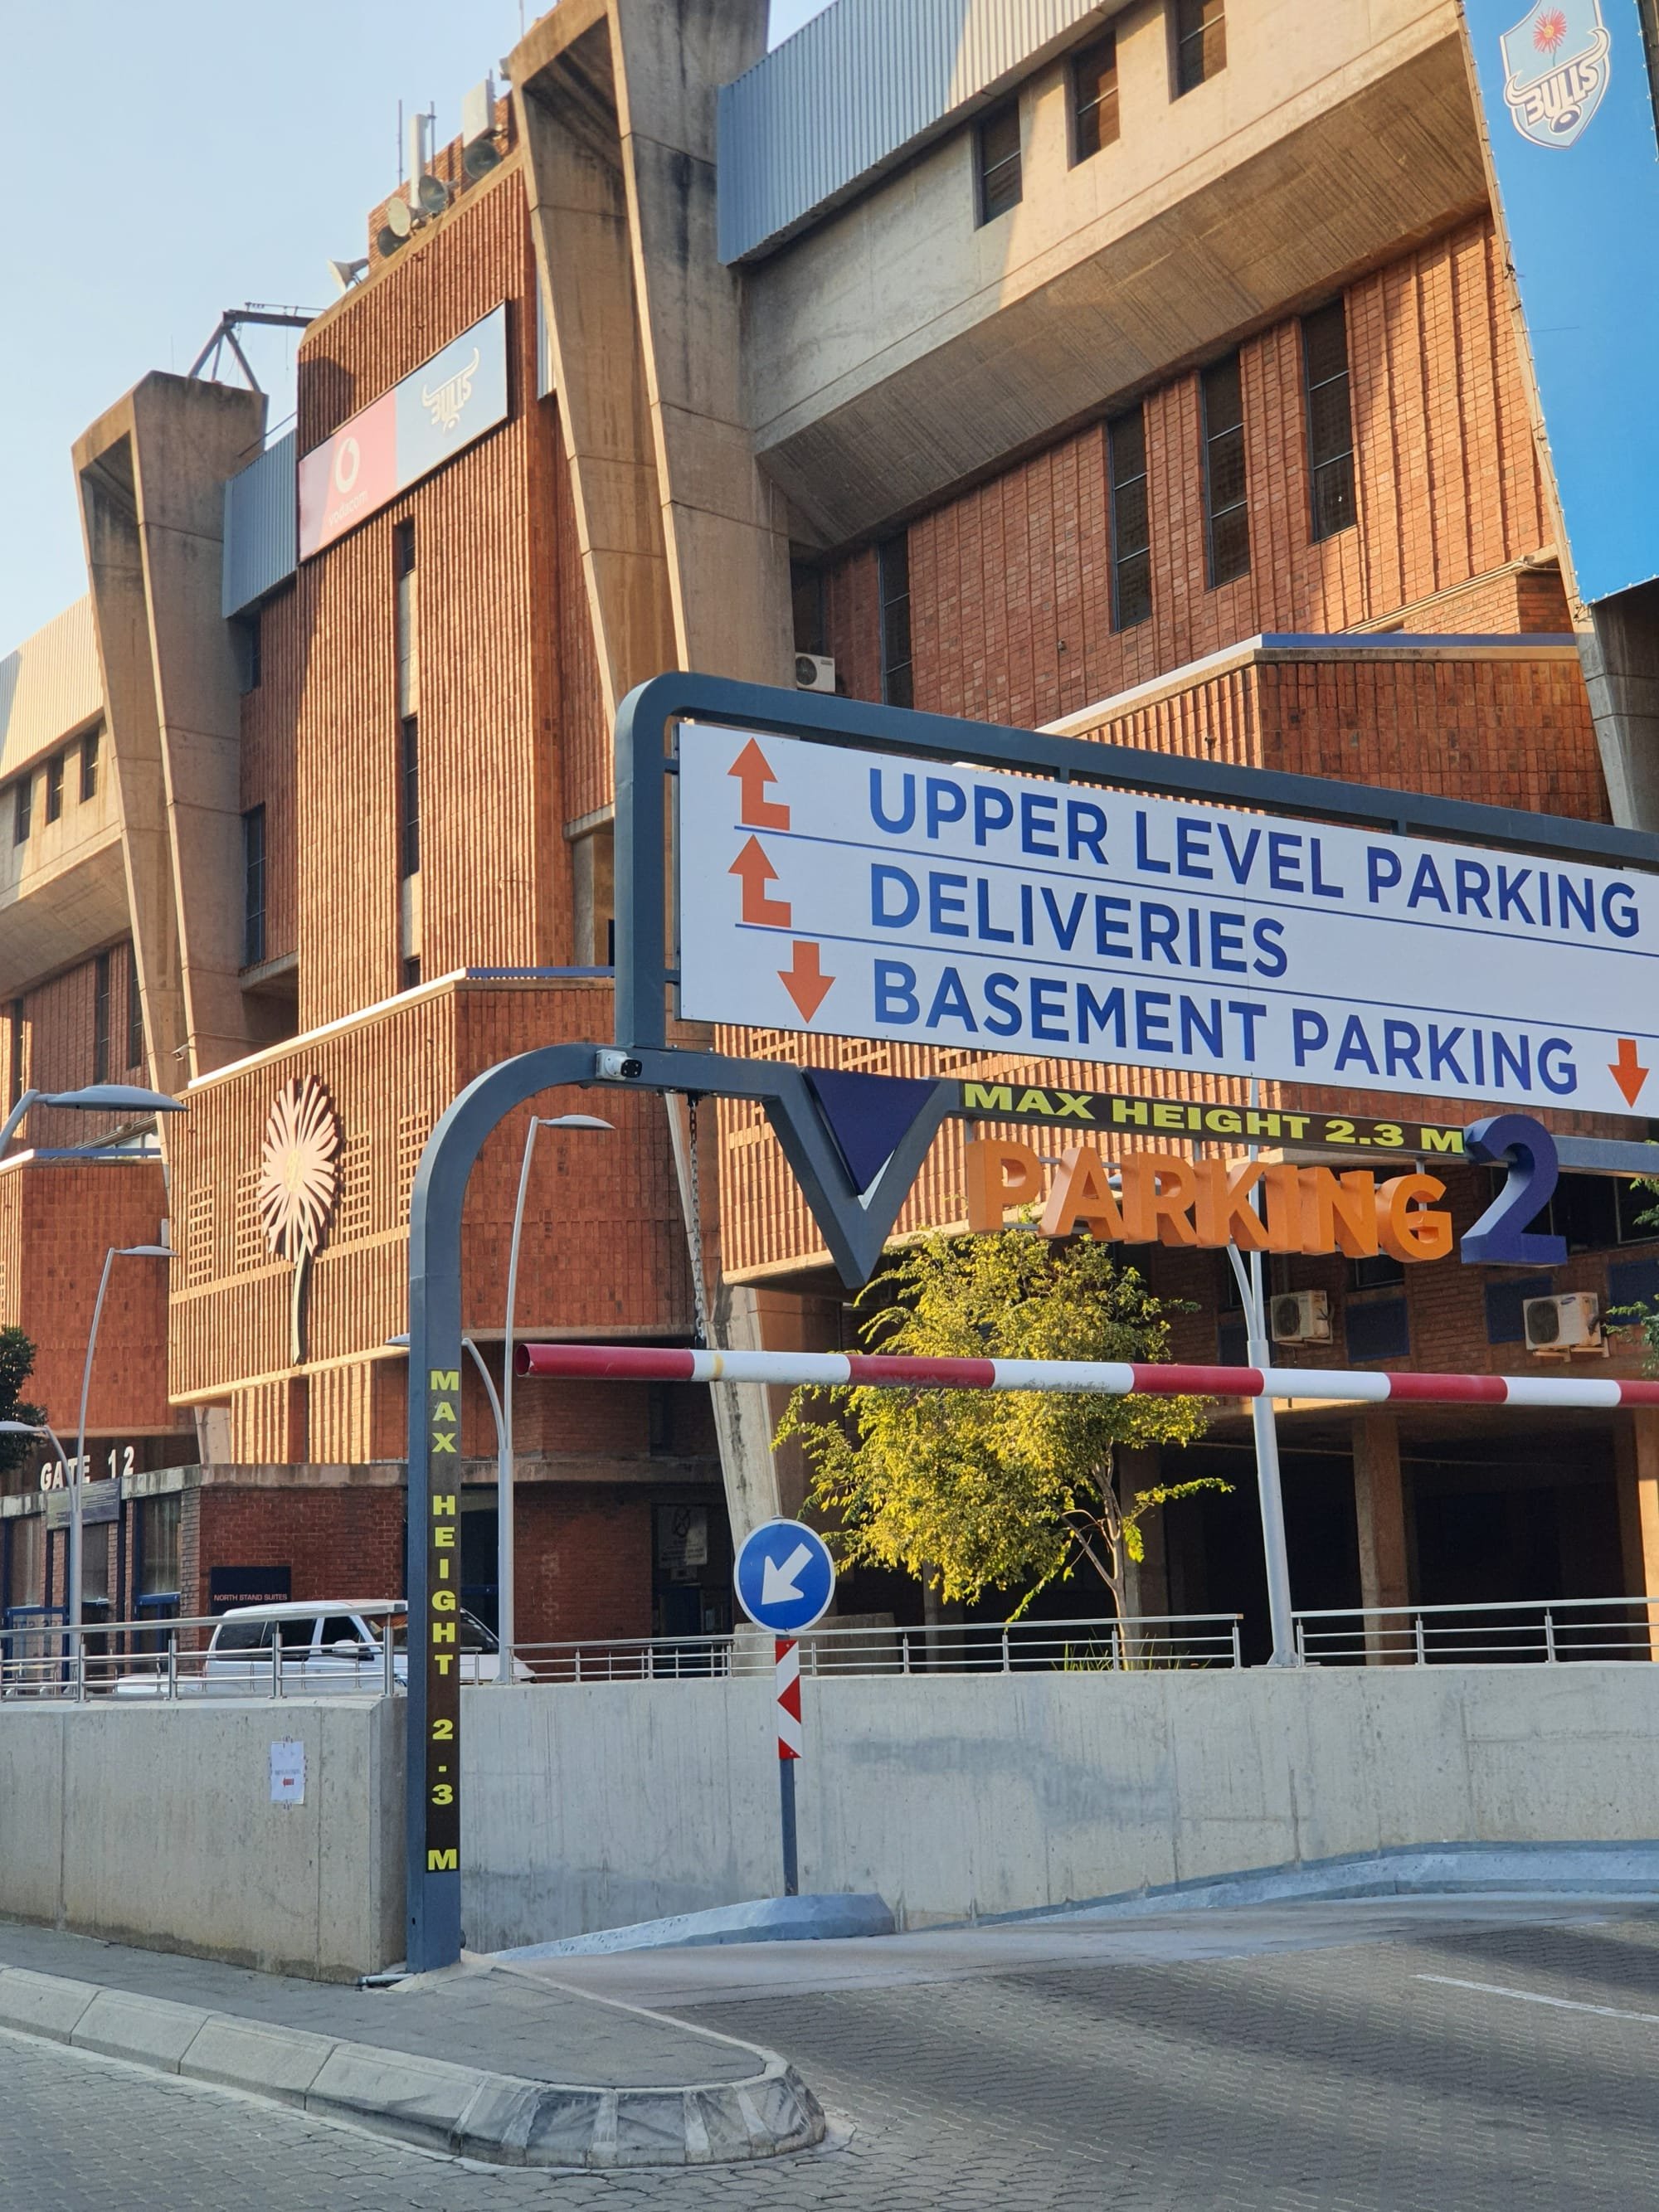 Free basement parking for up to 2 hours.